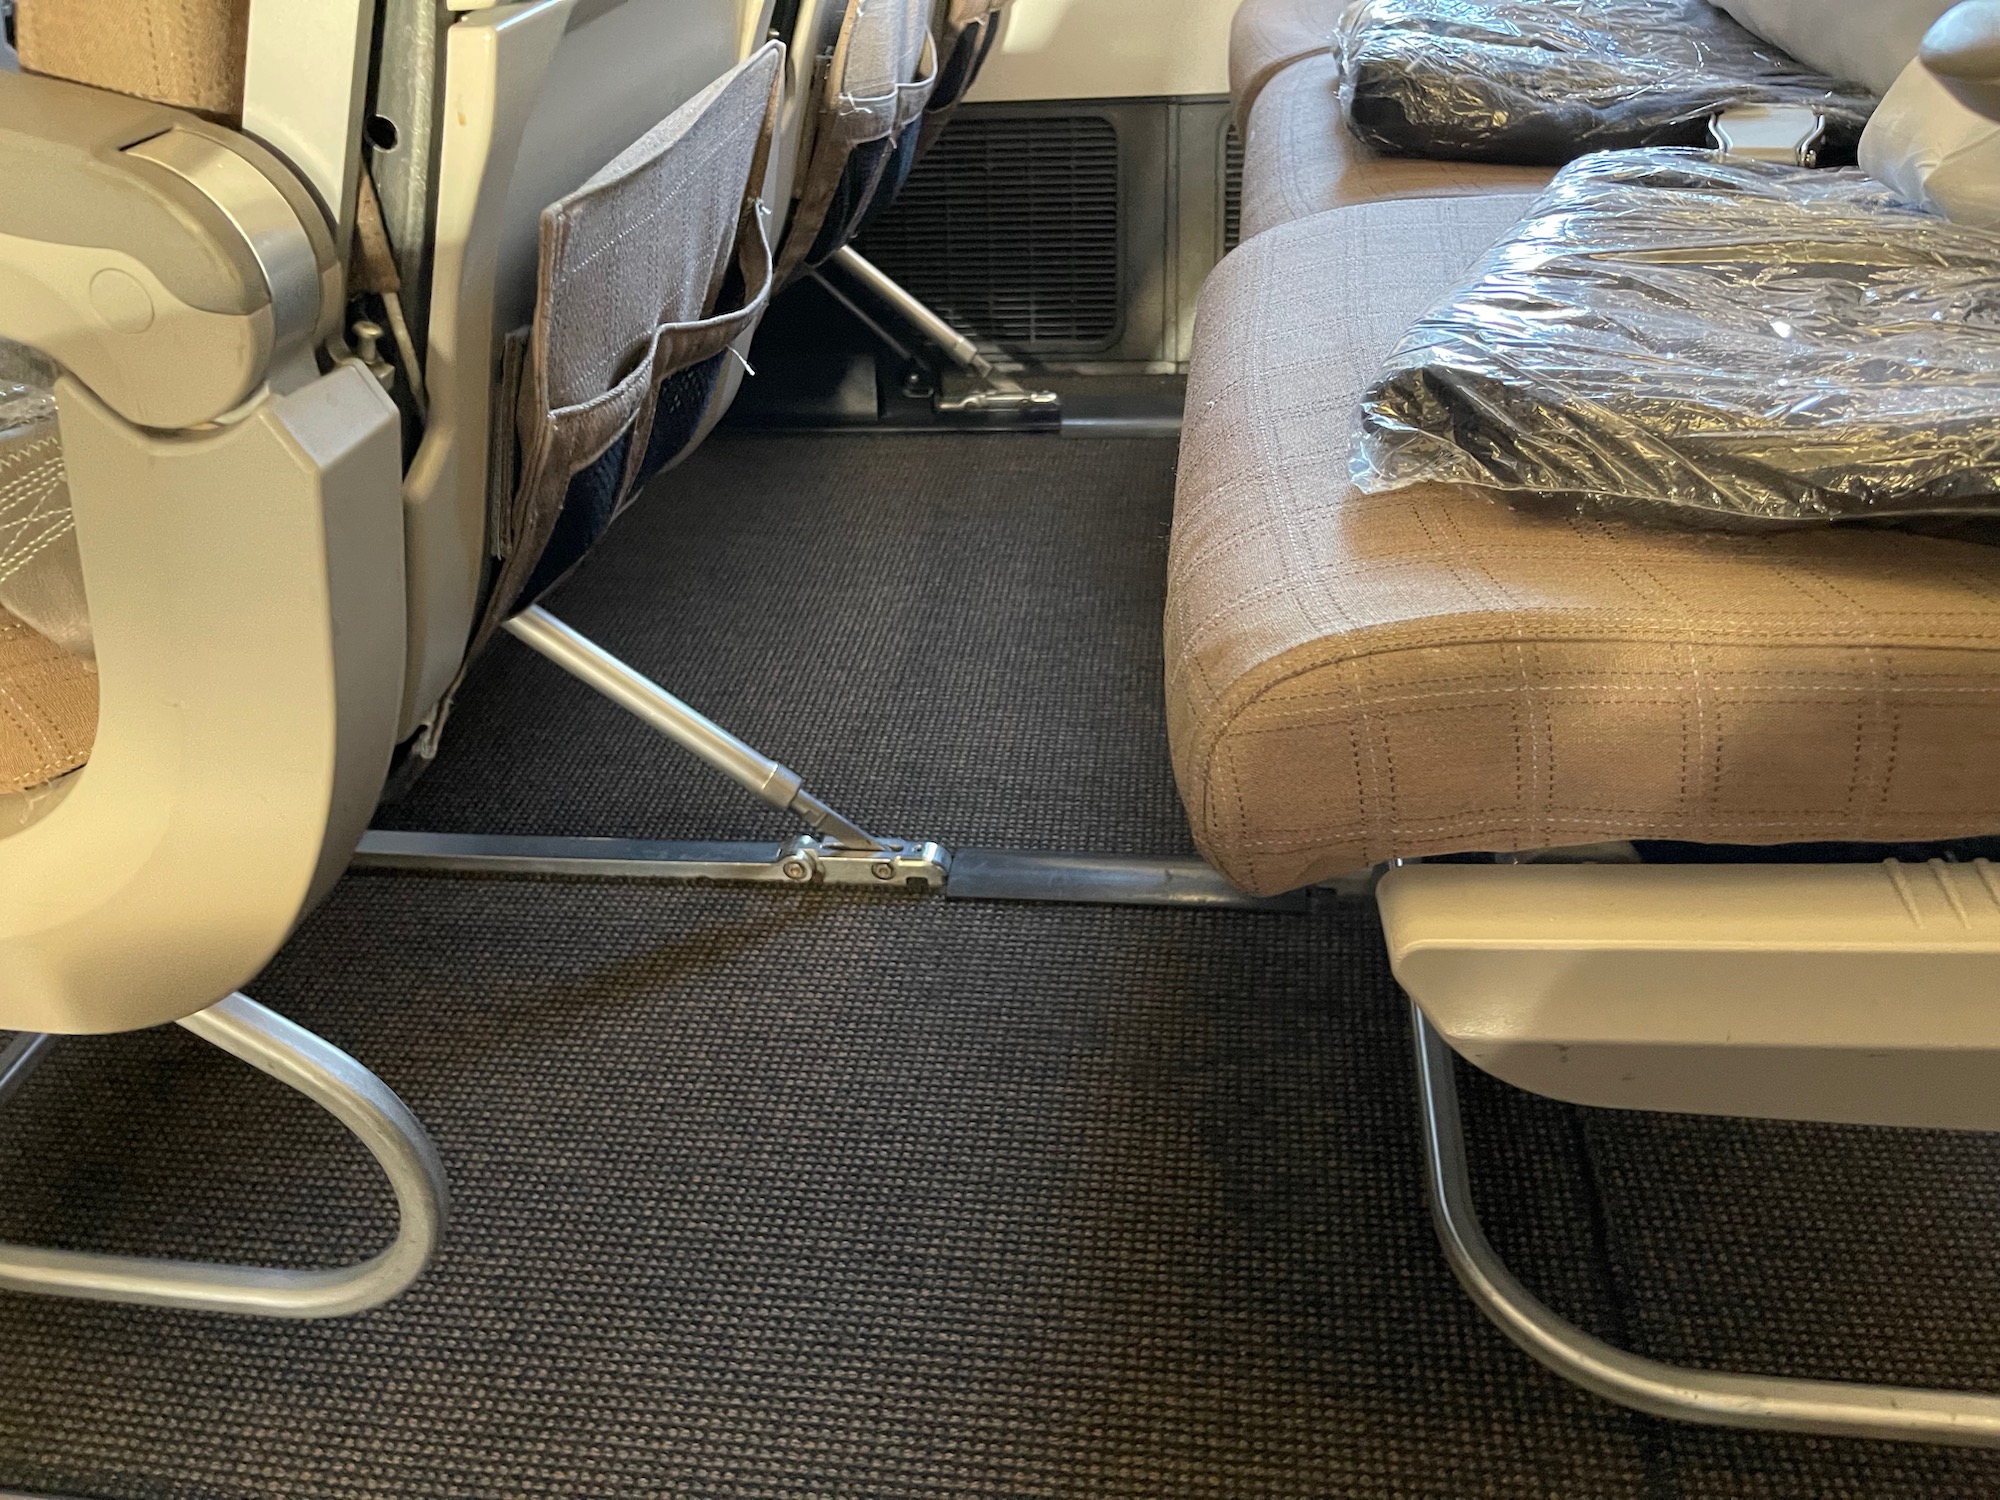 seats in an airplane with a seat